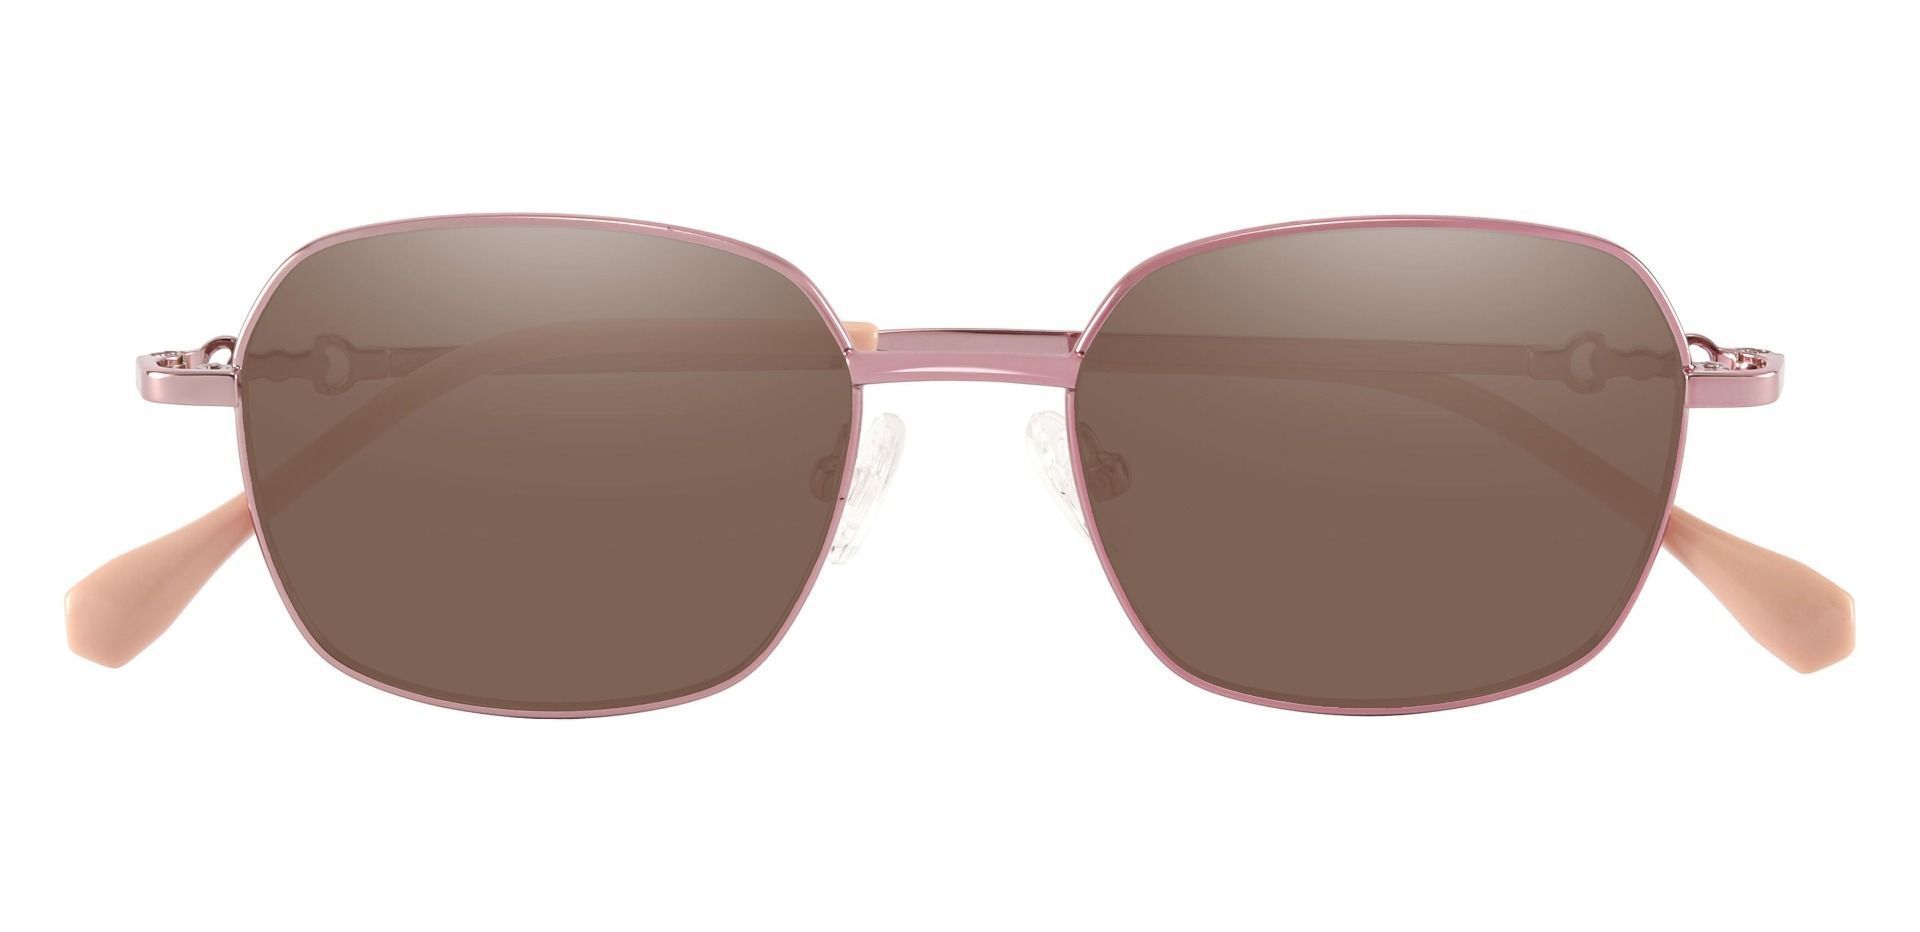 Averill Geometric Non-Rx Sunglasses - Rose Gold Frame With Brown Lenses